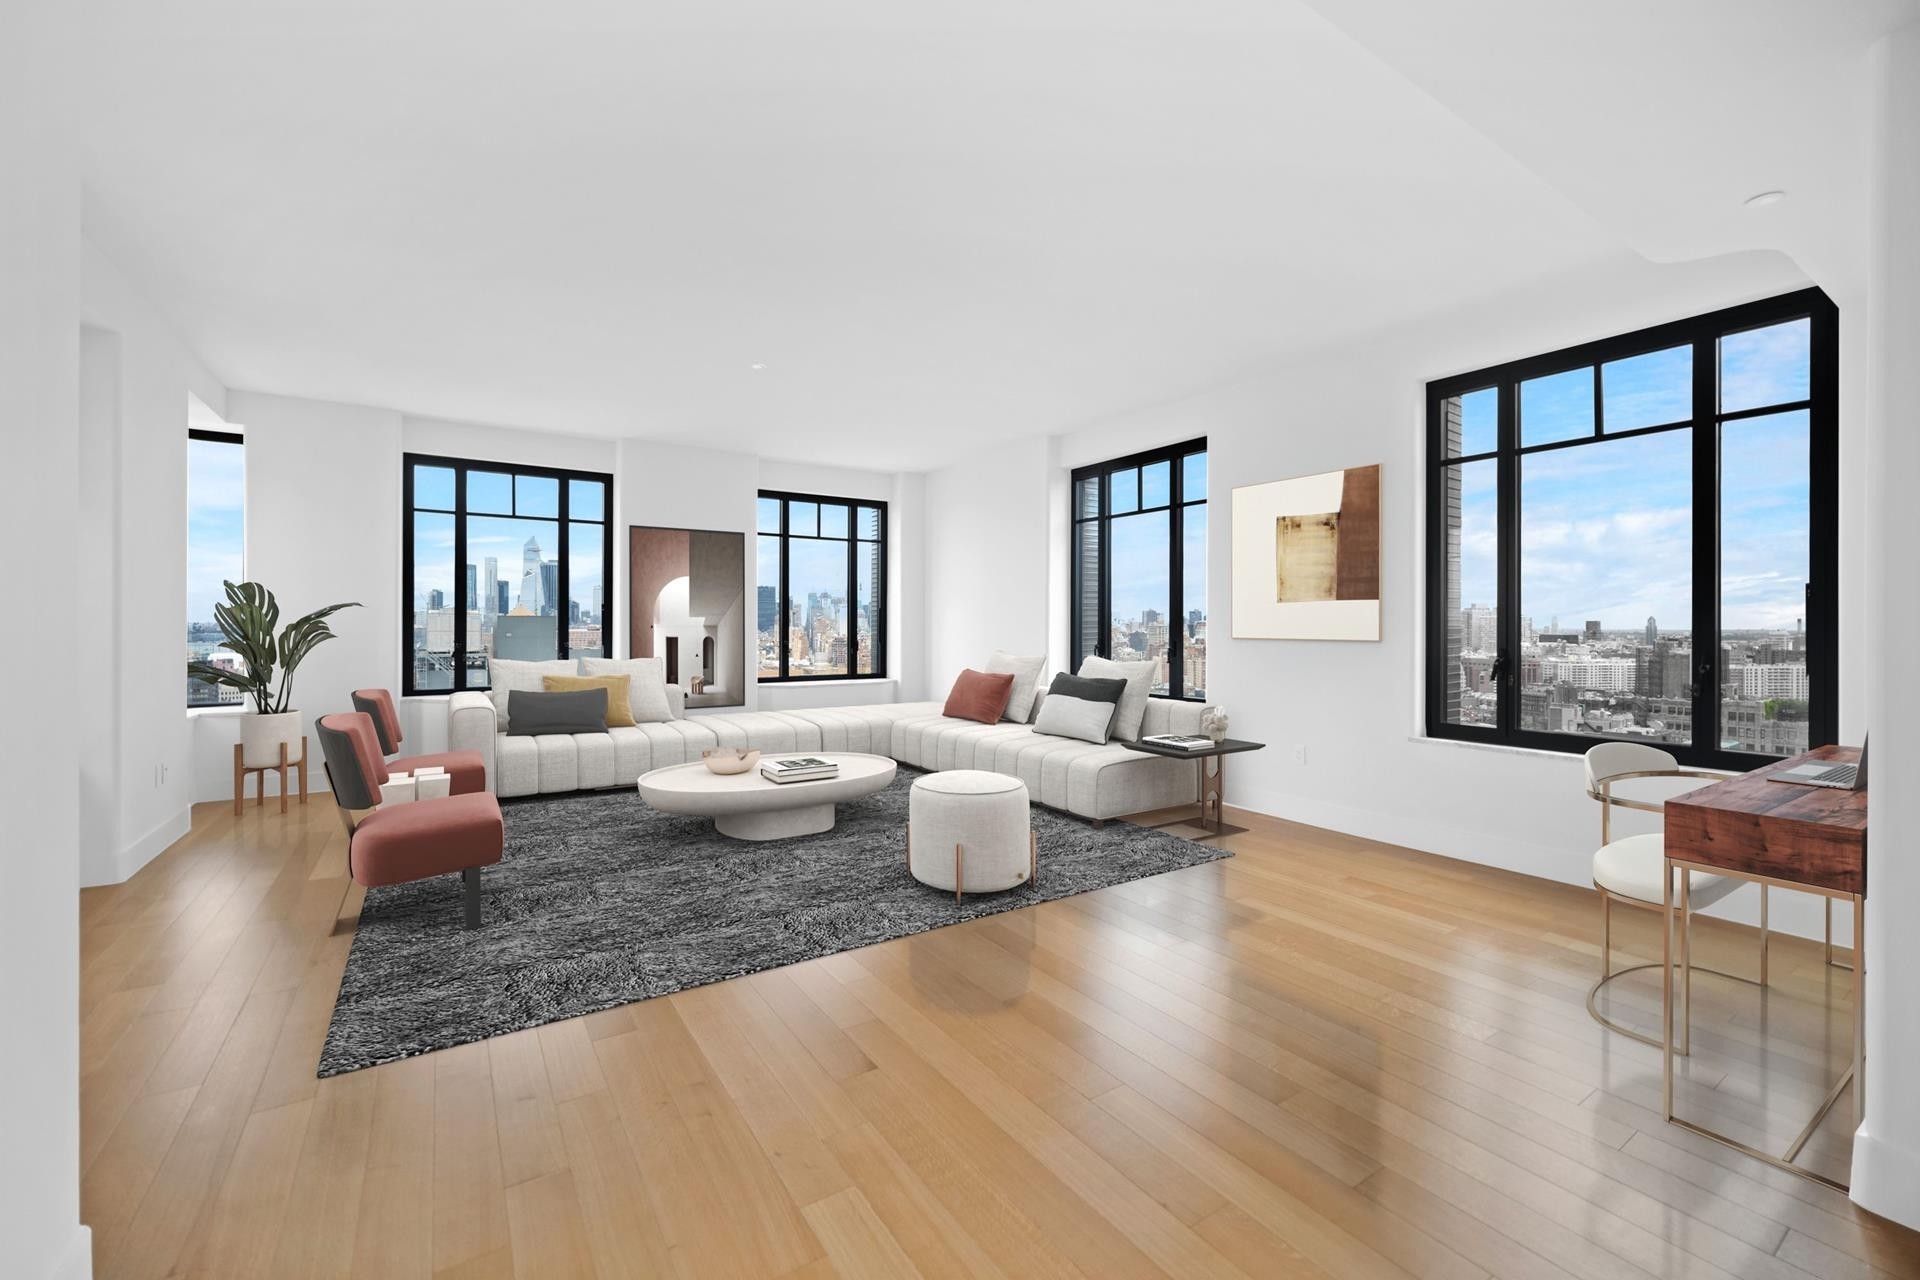 Condominium for Sale at Greenwich West, 110 CHARLTON ST, PH30C Hudson Square, New York, NY 10014